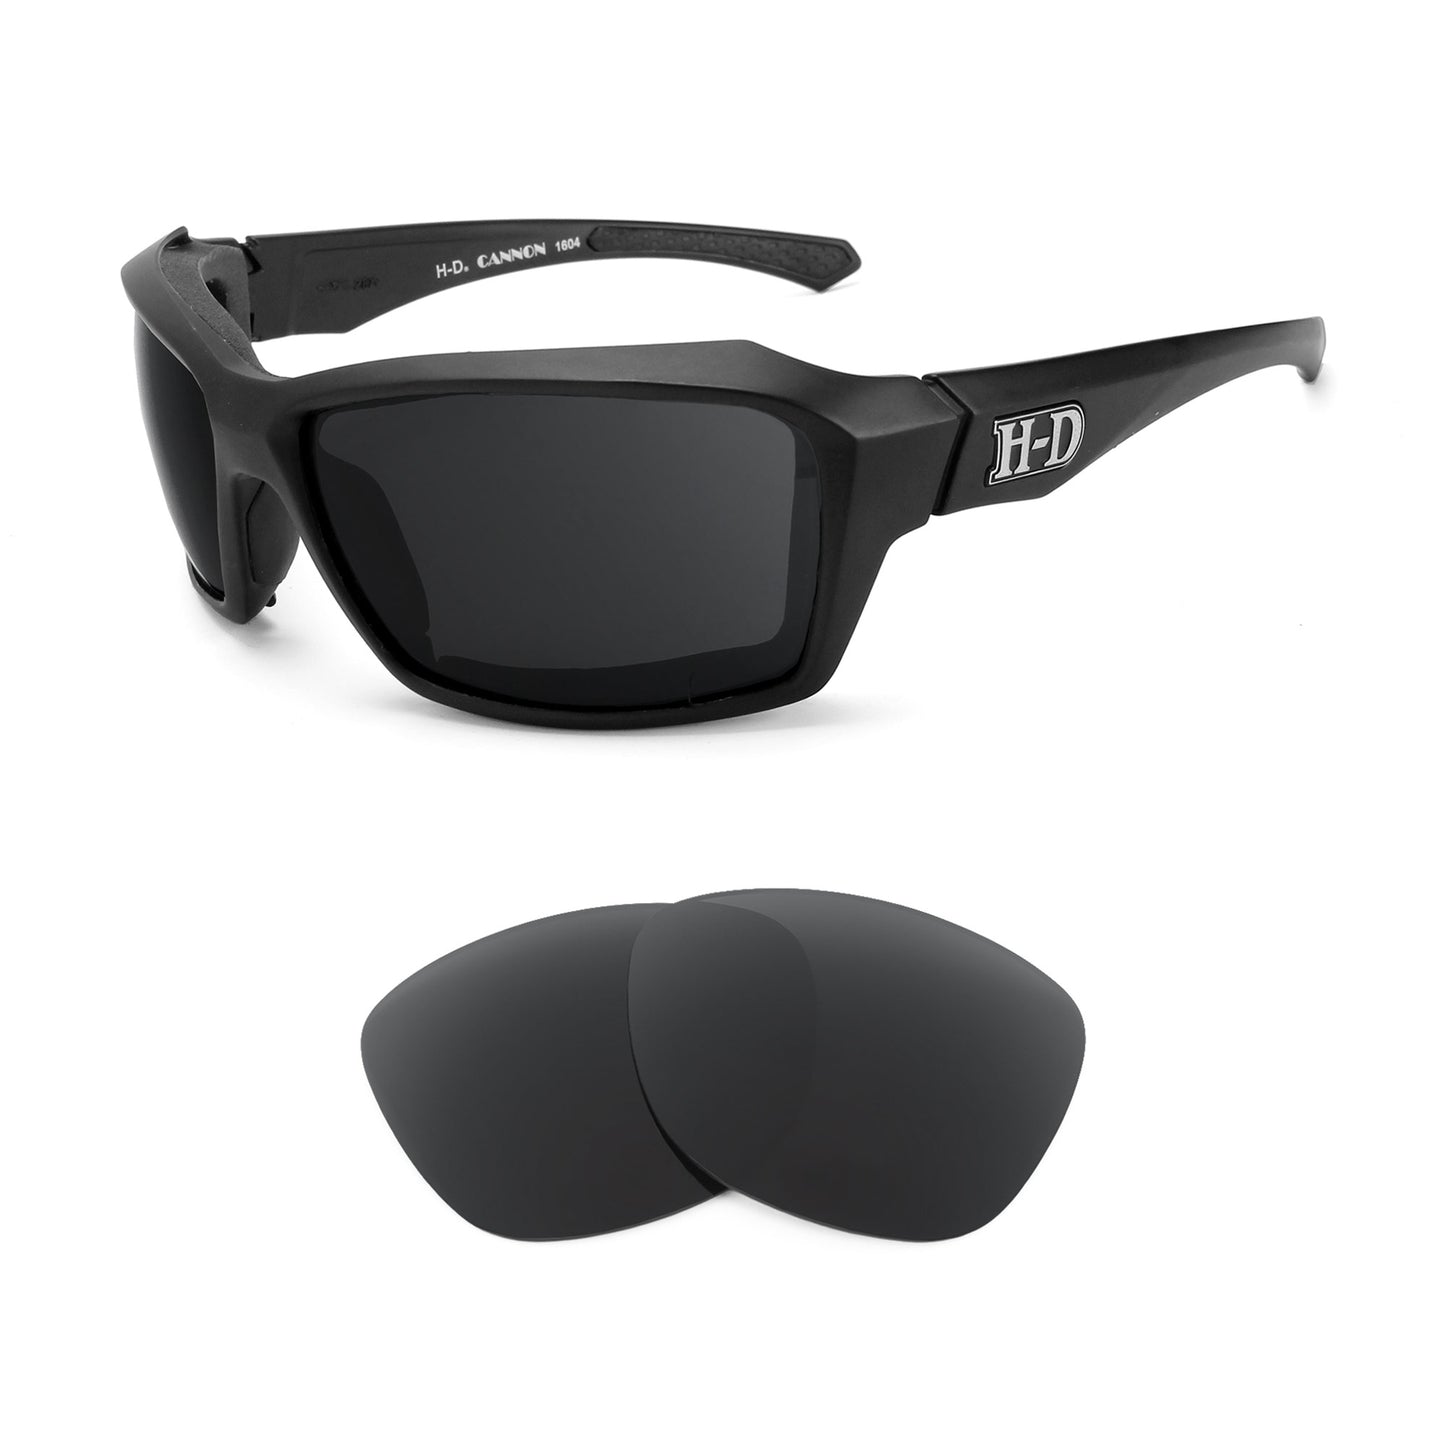 Harley Davidson Cannon sunglasses with replacement lenses